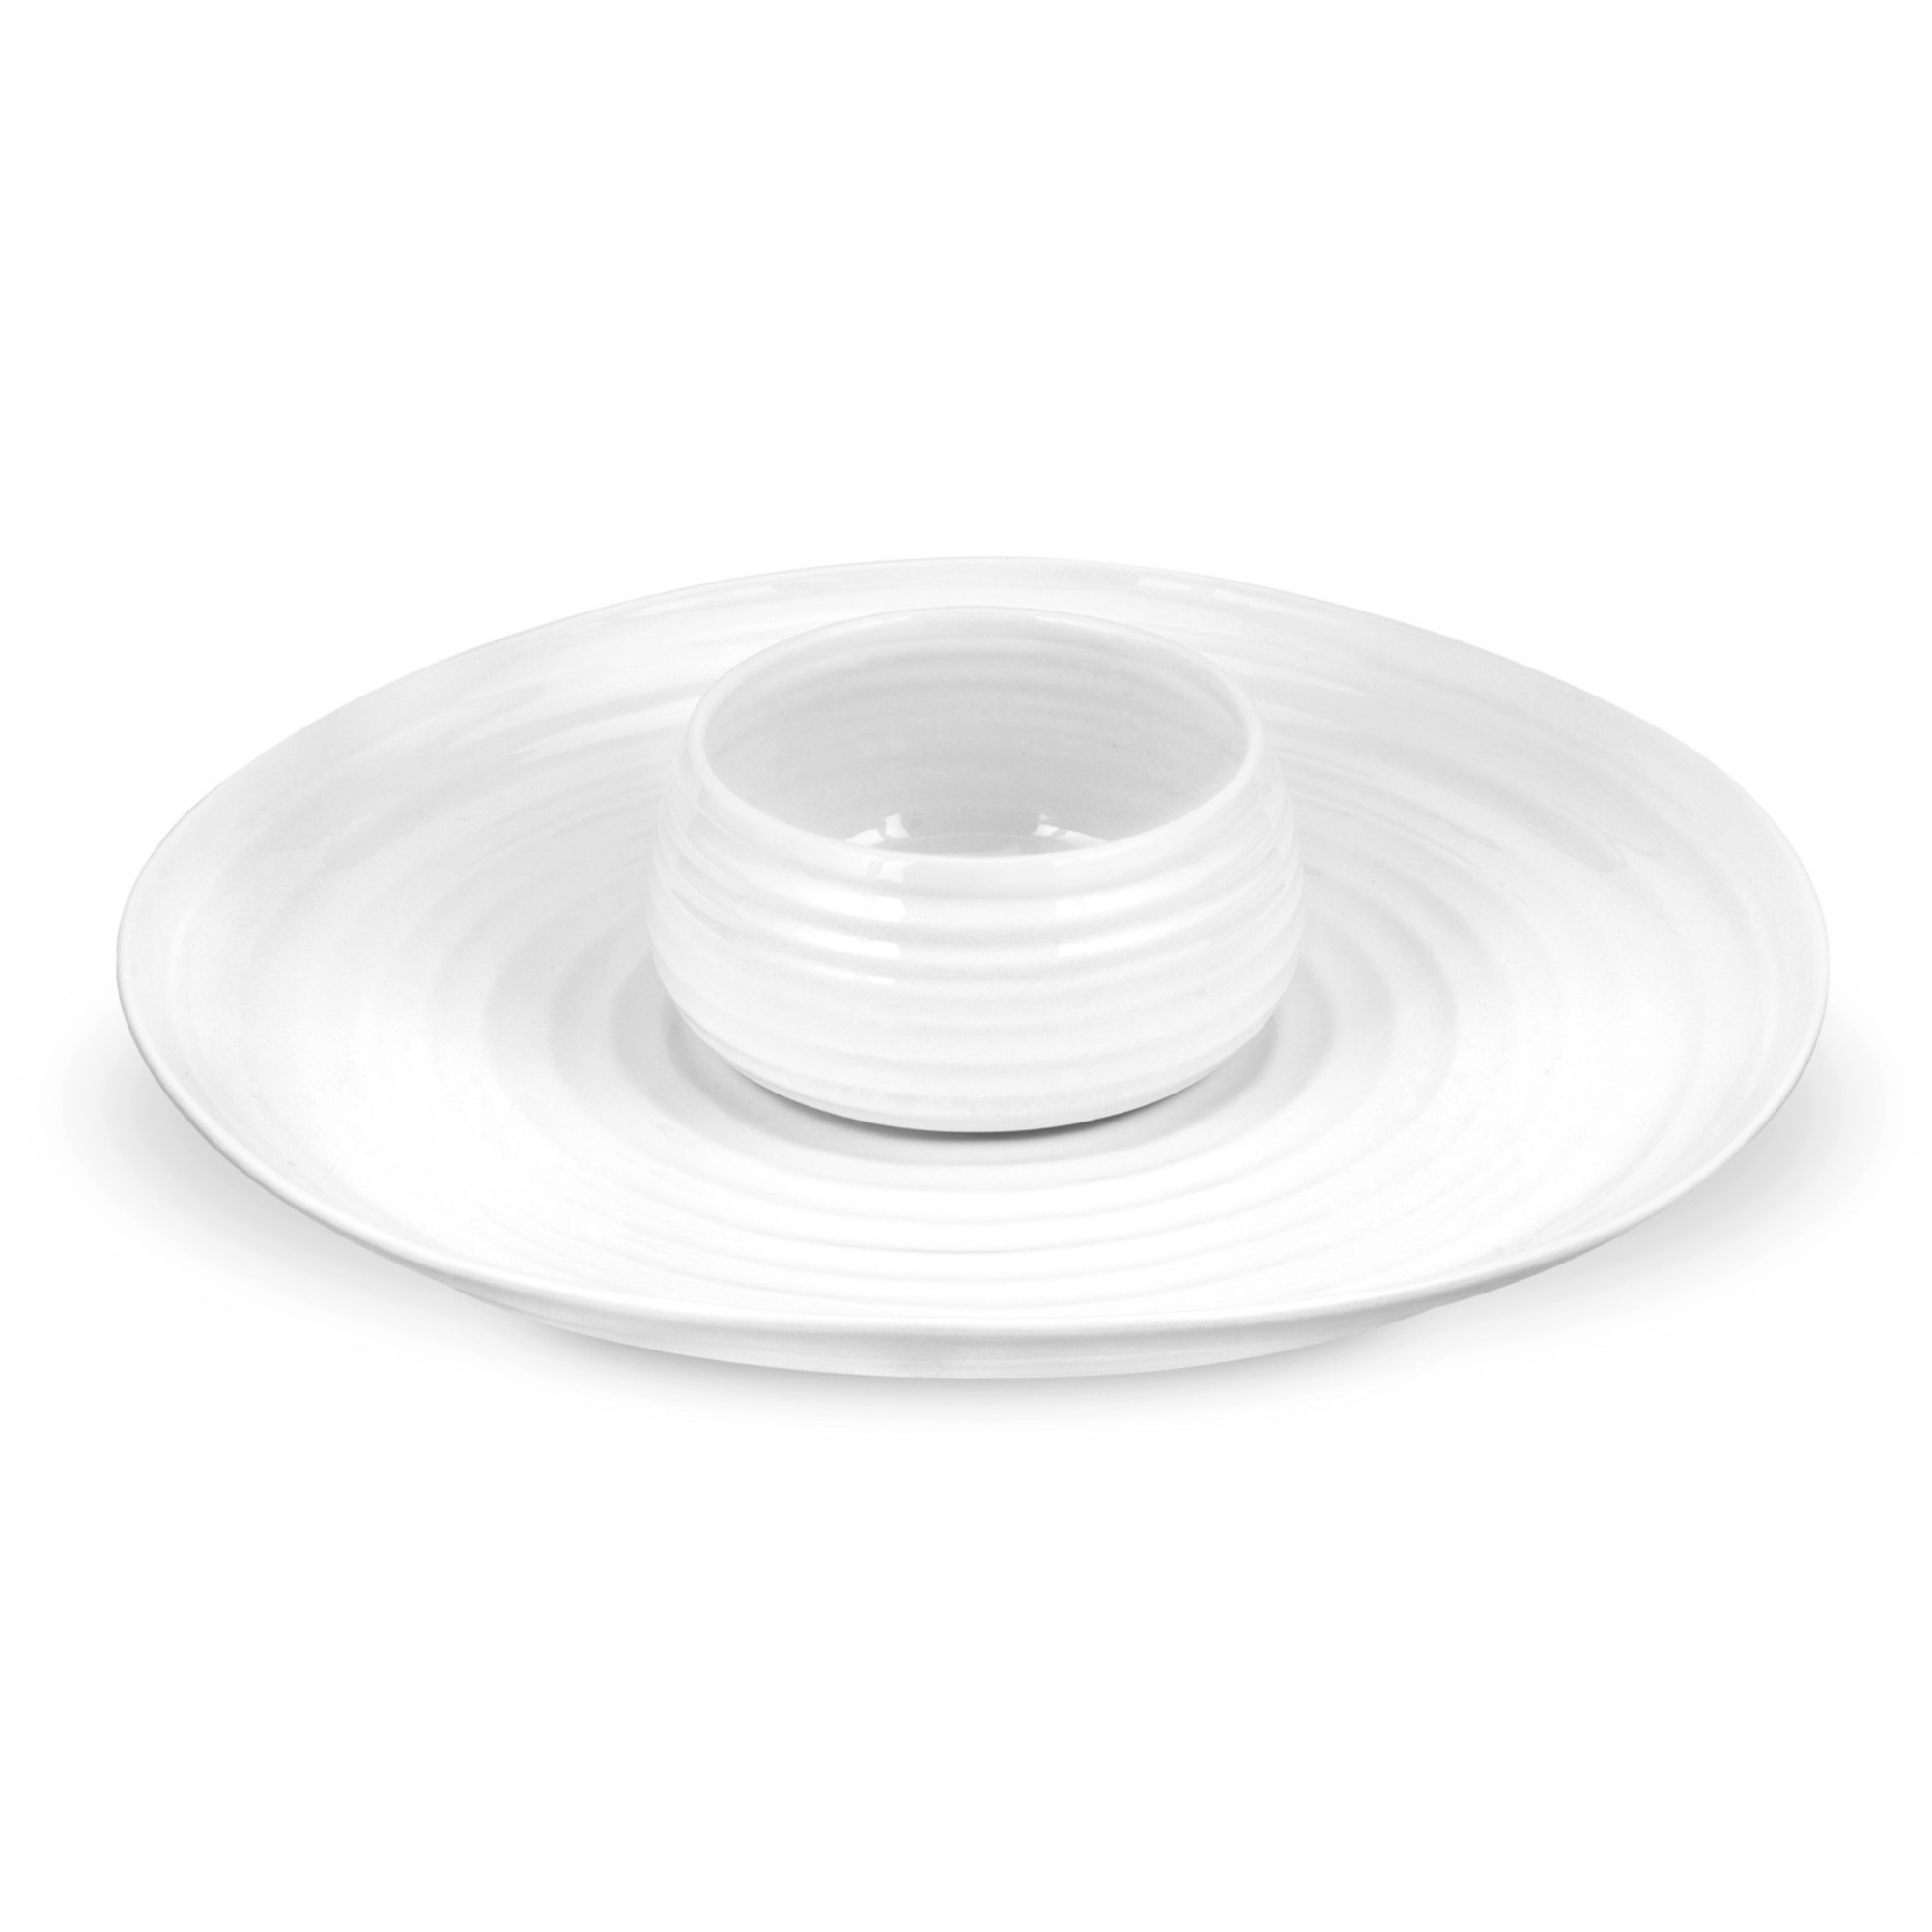 Sophie Conran Dipping Dish and Platter